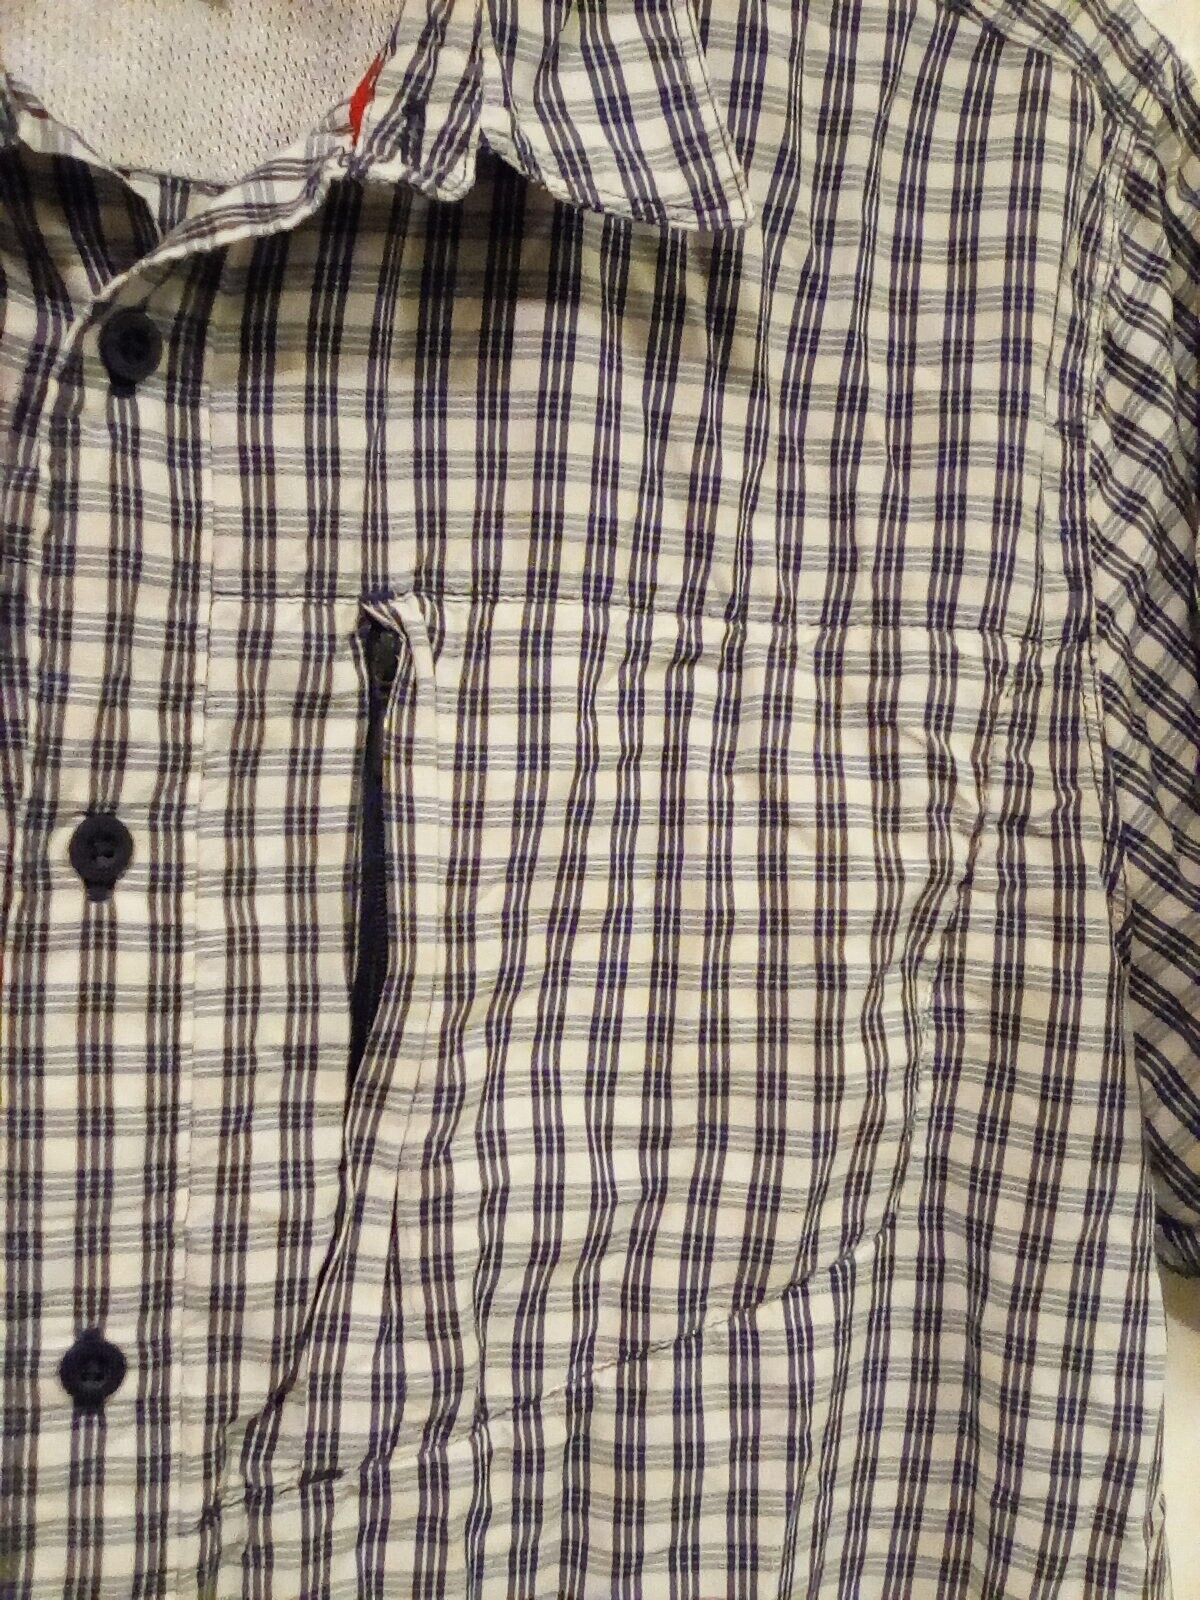 The North Face Mens Shirt Sz XL Blue White Check Vented Side Zip Pocket